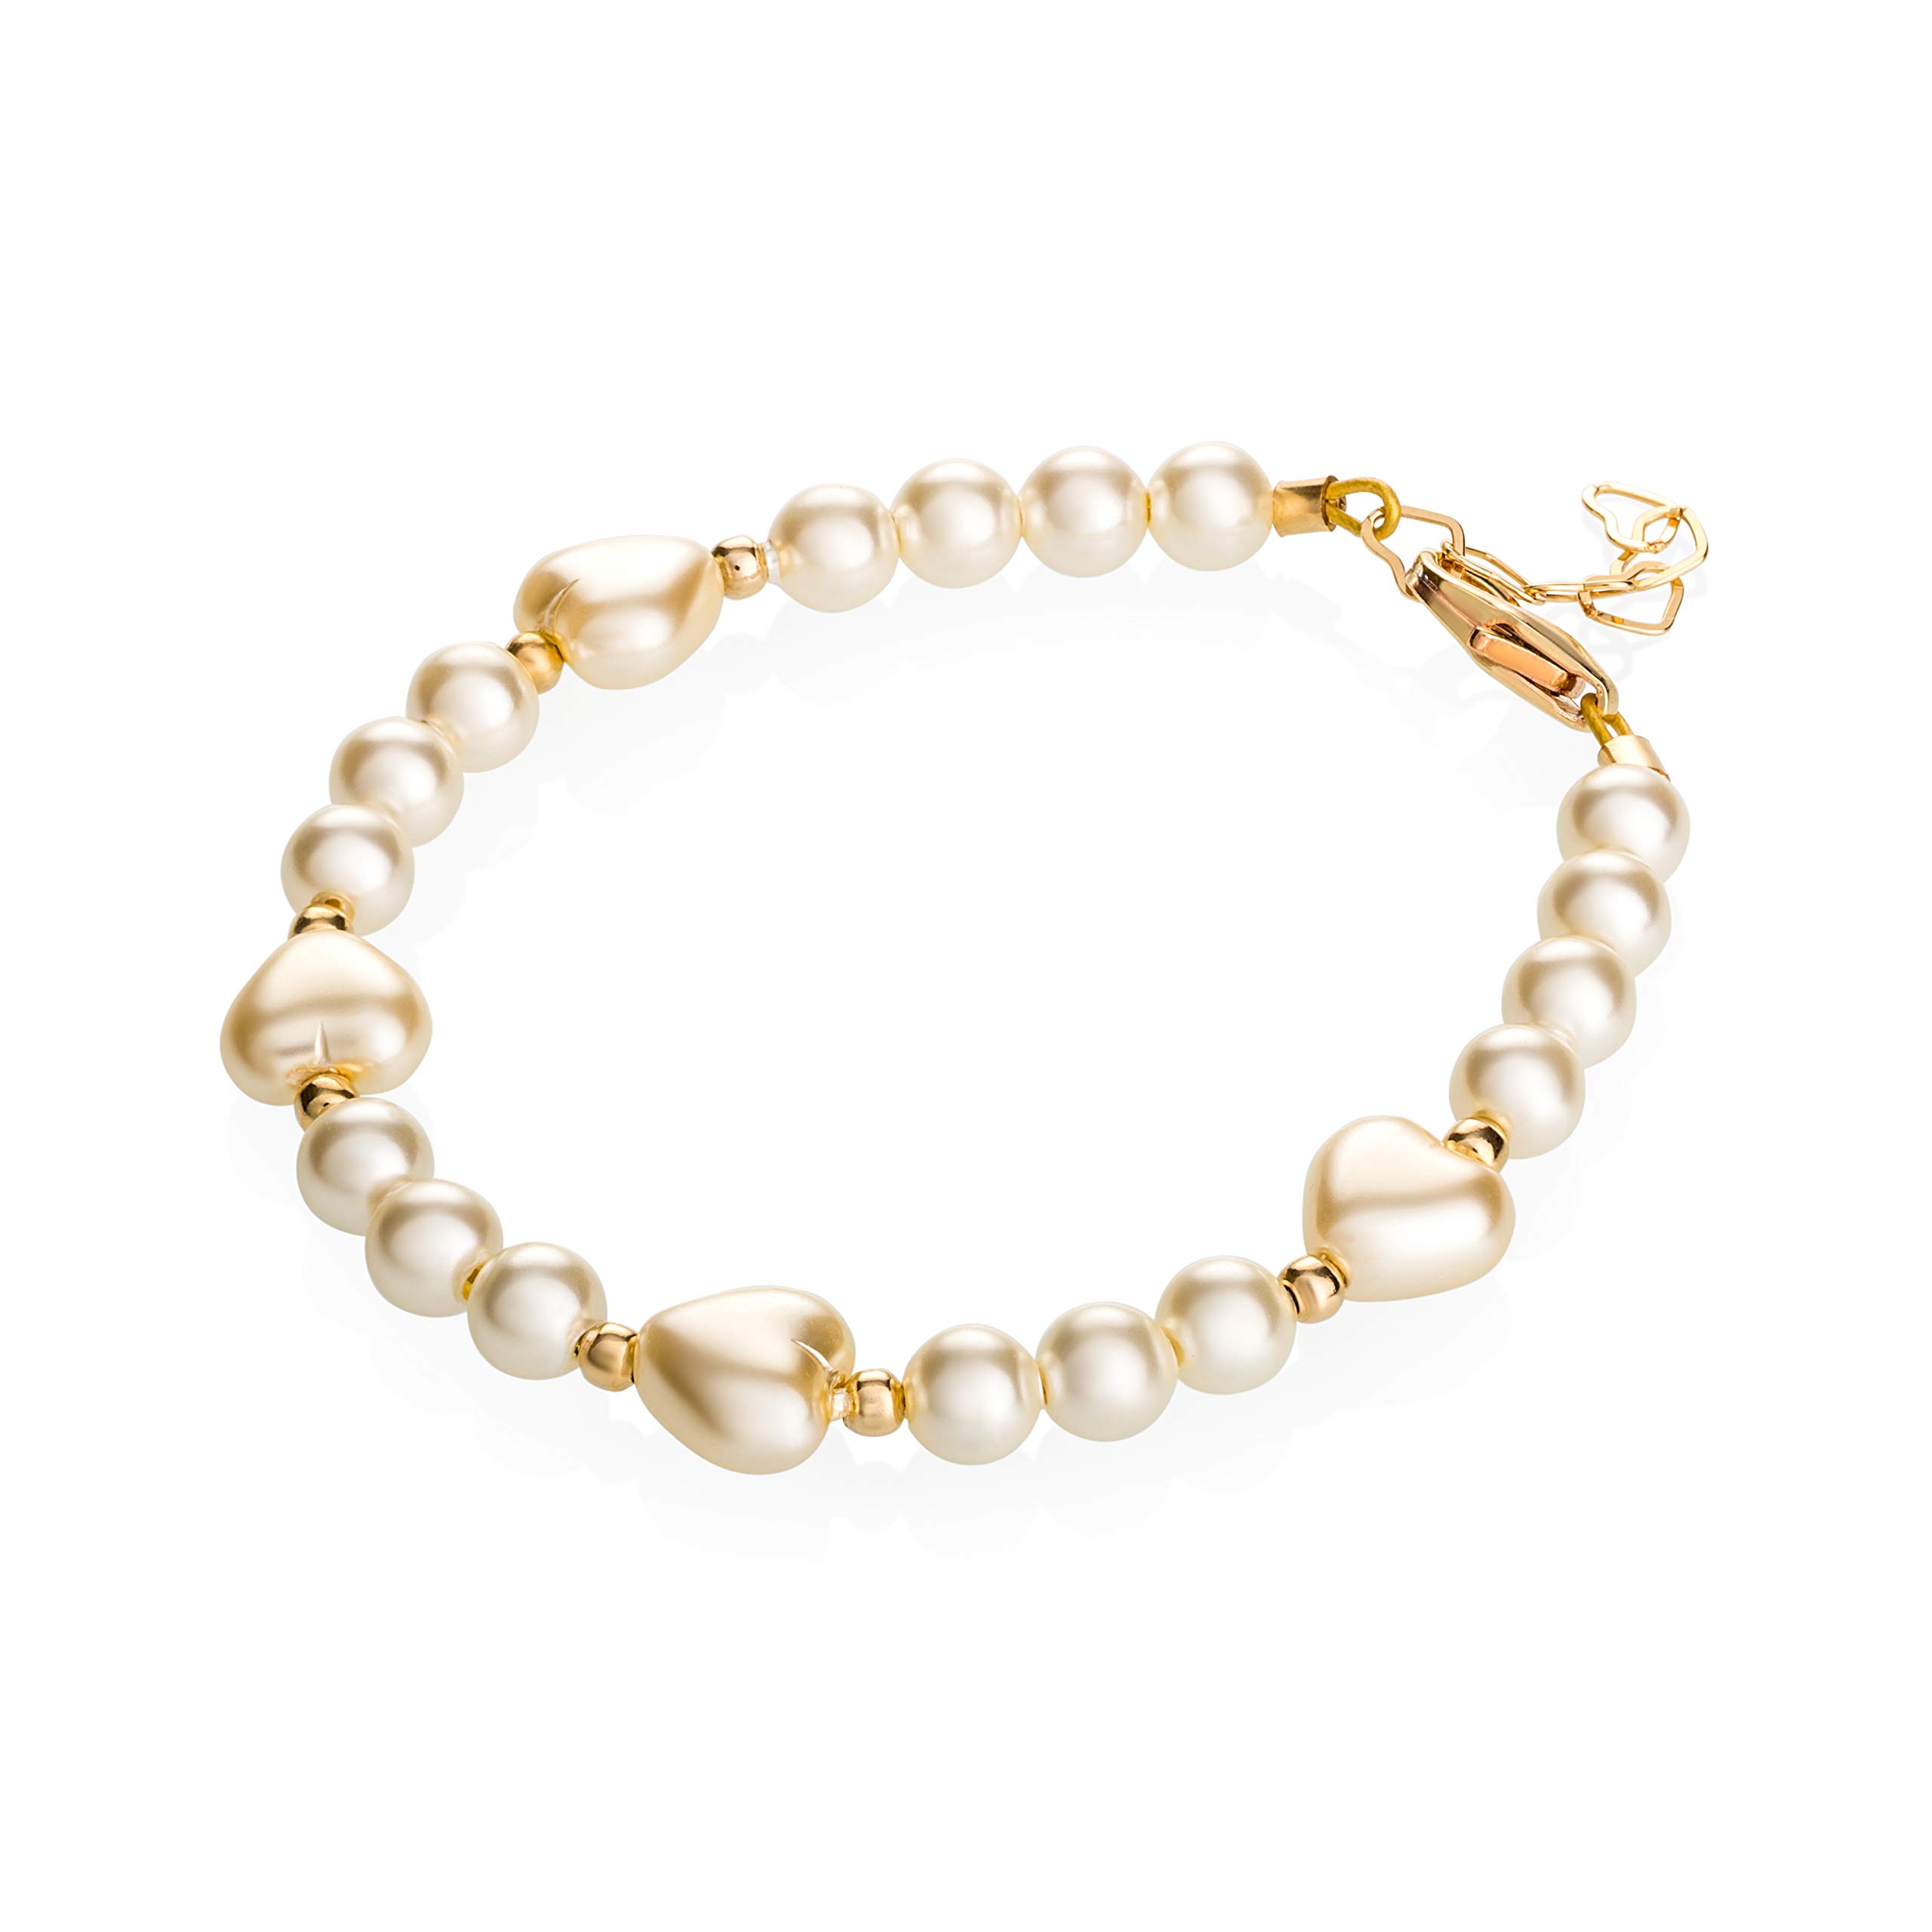 Crystal Dream Elegant Heart Gold Beads Luxury 14KT Gold-Filled Baby Girl Bracelet with Ivory European Simulated Pearls (BHII)